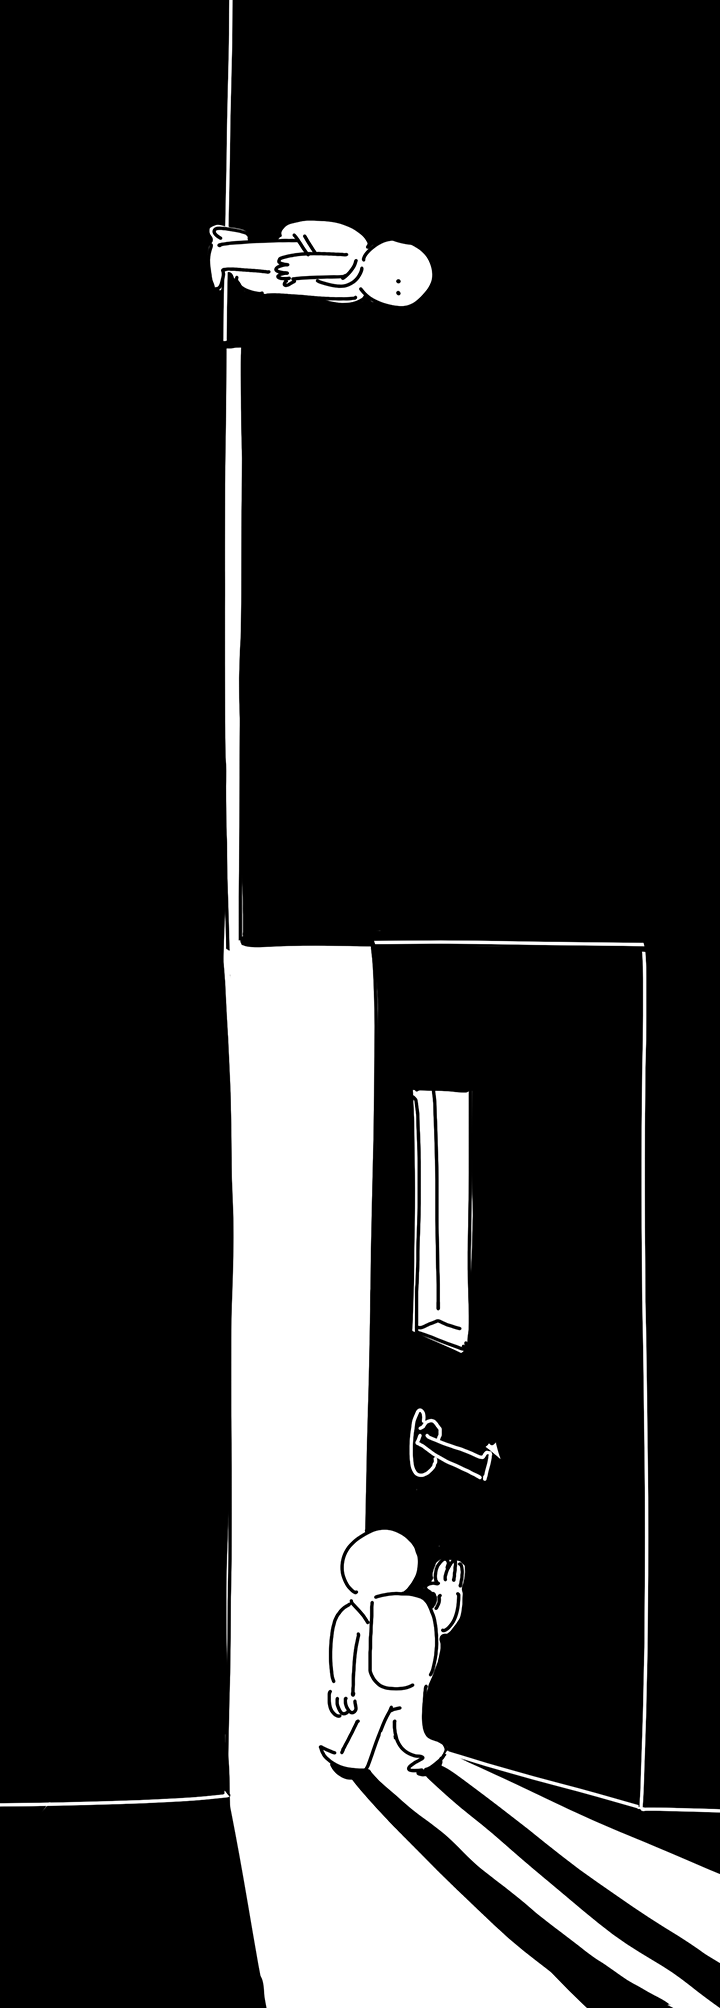 Panel 3 continued: 3rd iteration of the kid walking down the hallway, they approach a long strip of rectangular light on the floor. Panel 4: The strip of light on the ground morphs into the light streaming through an open doorway like the one the kid on the right left the kid on the left with. The kid on the right is pushing the door open and walking inside. Their long shadow stretches behind them into the hallway.